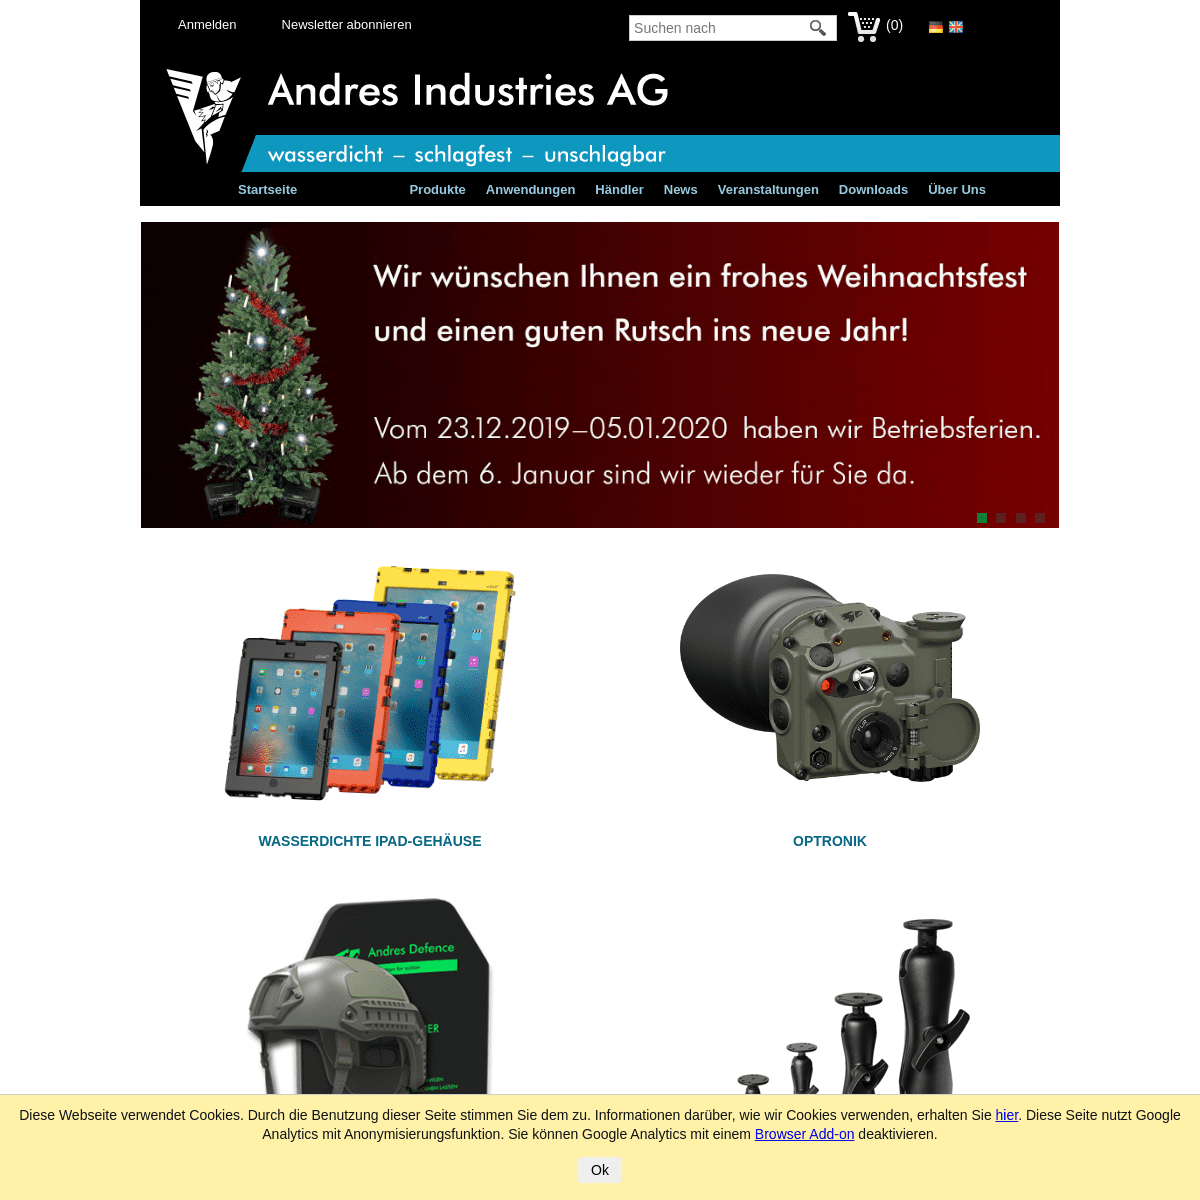 A complete backup of andres-industries-shop.de